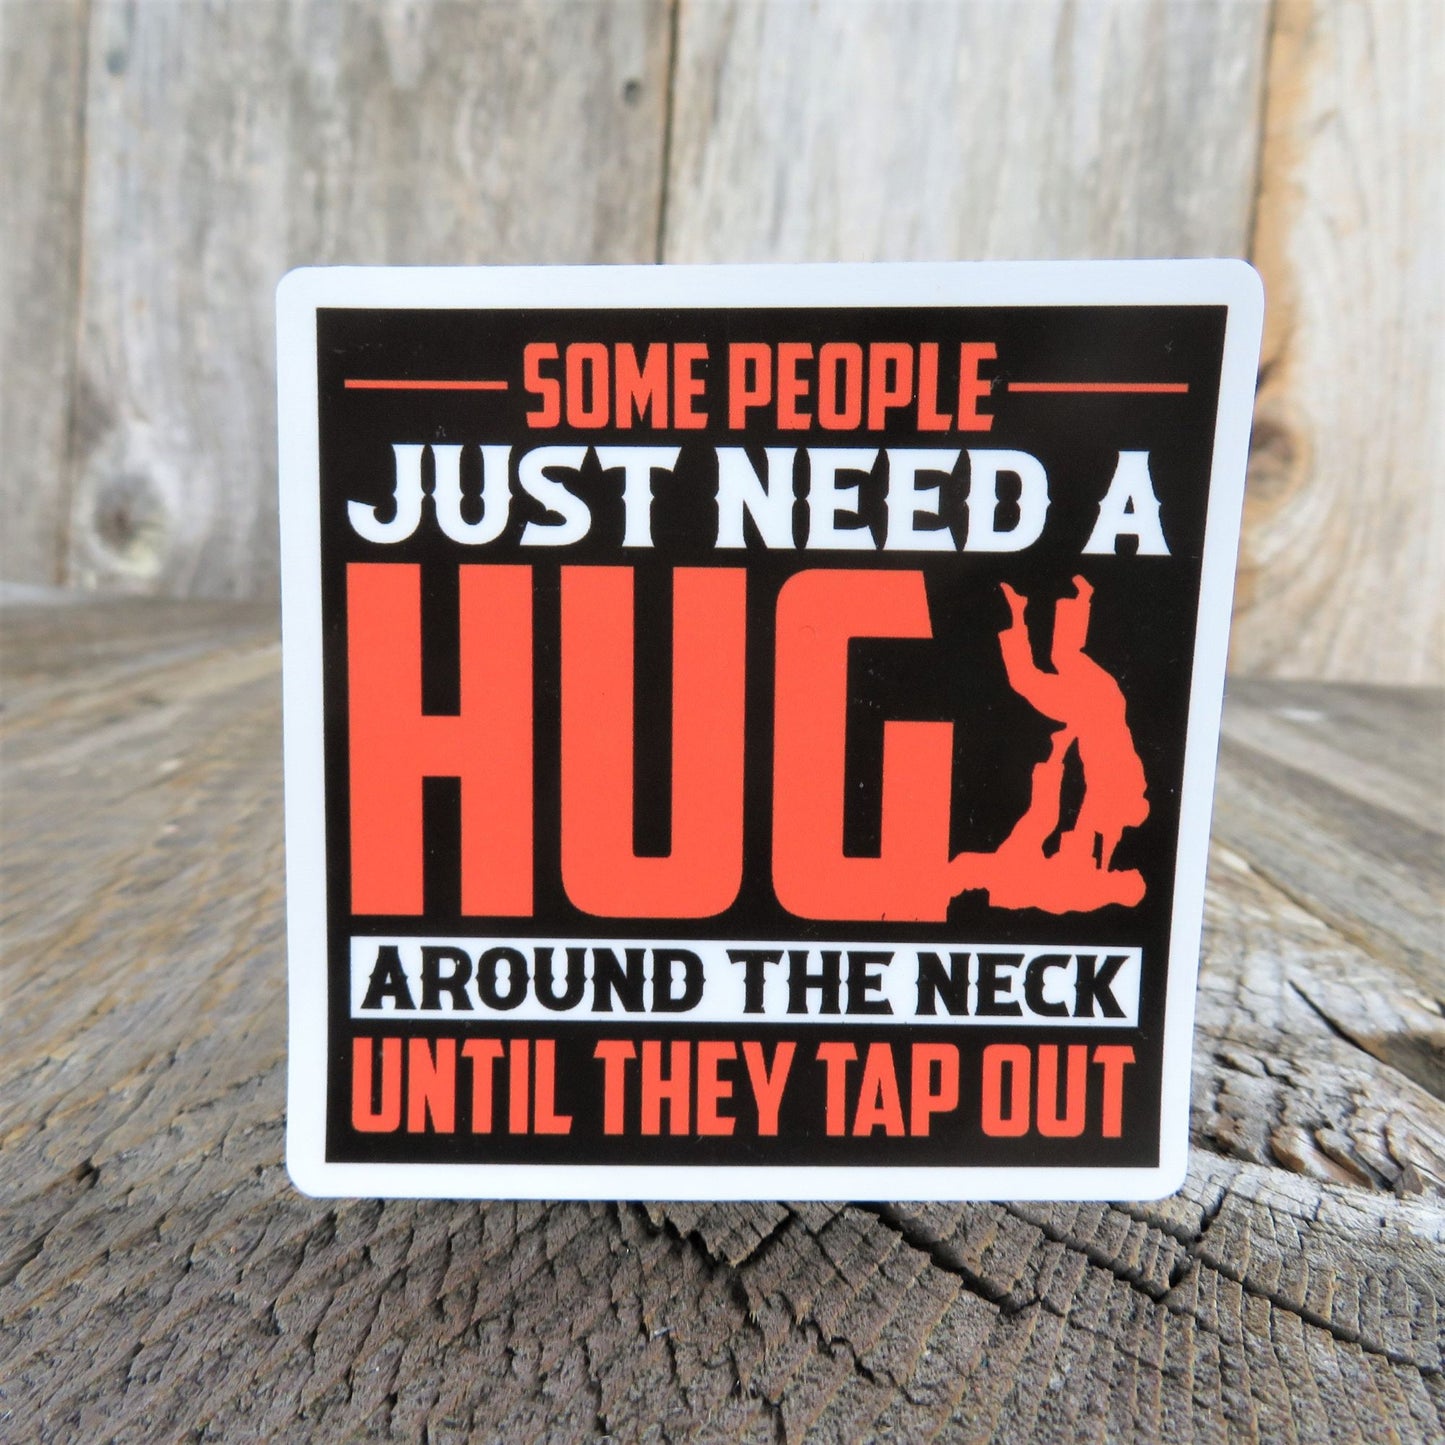 Martial Arts Sticker Decal Humor Some People Need A Hug Around the Neck Funny Full Color Waterproof Car Water Bottle Laptop